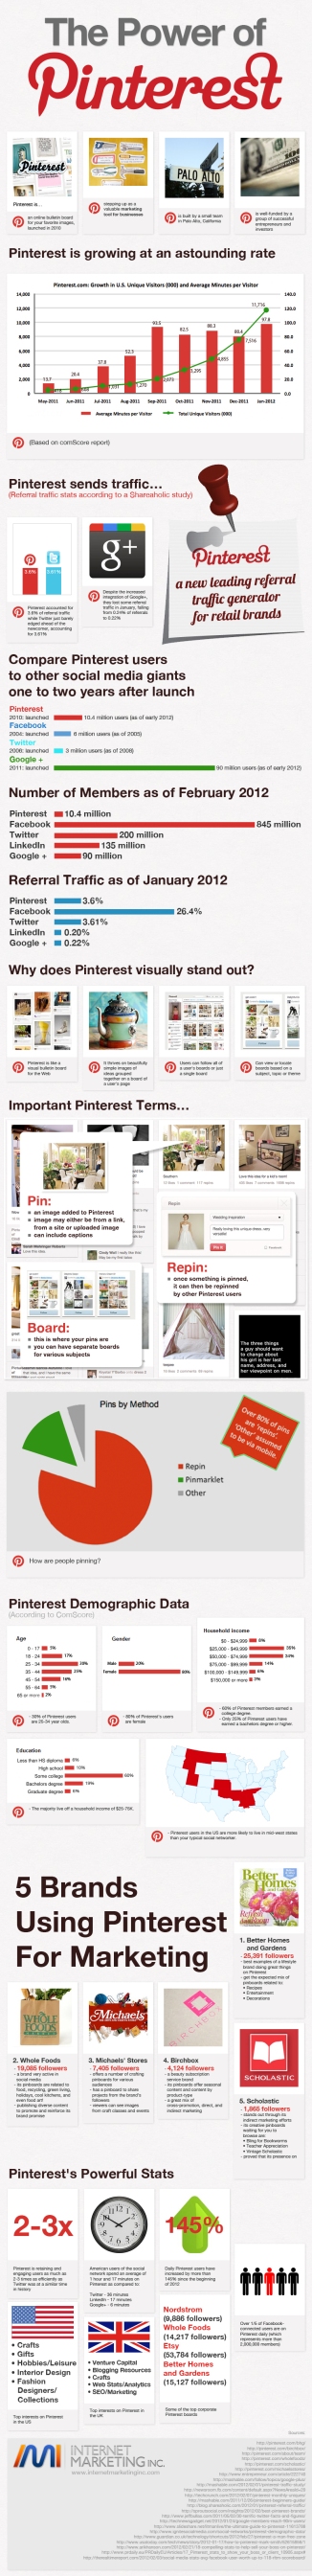 the-power-of-pinterest-infographic